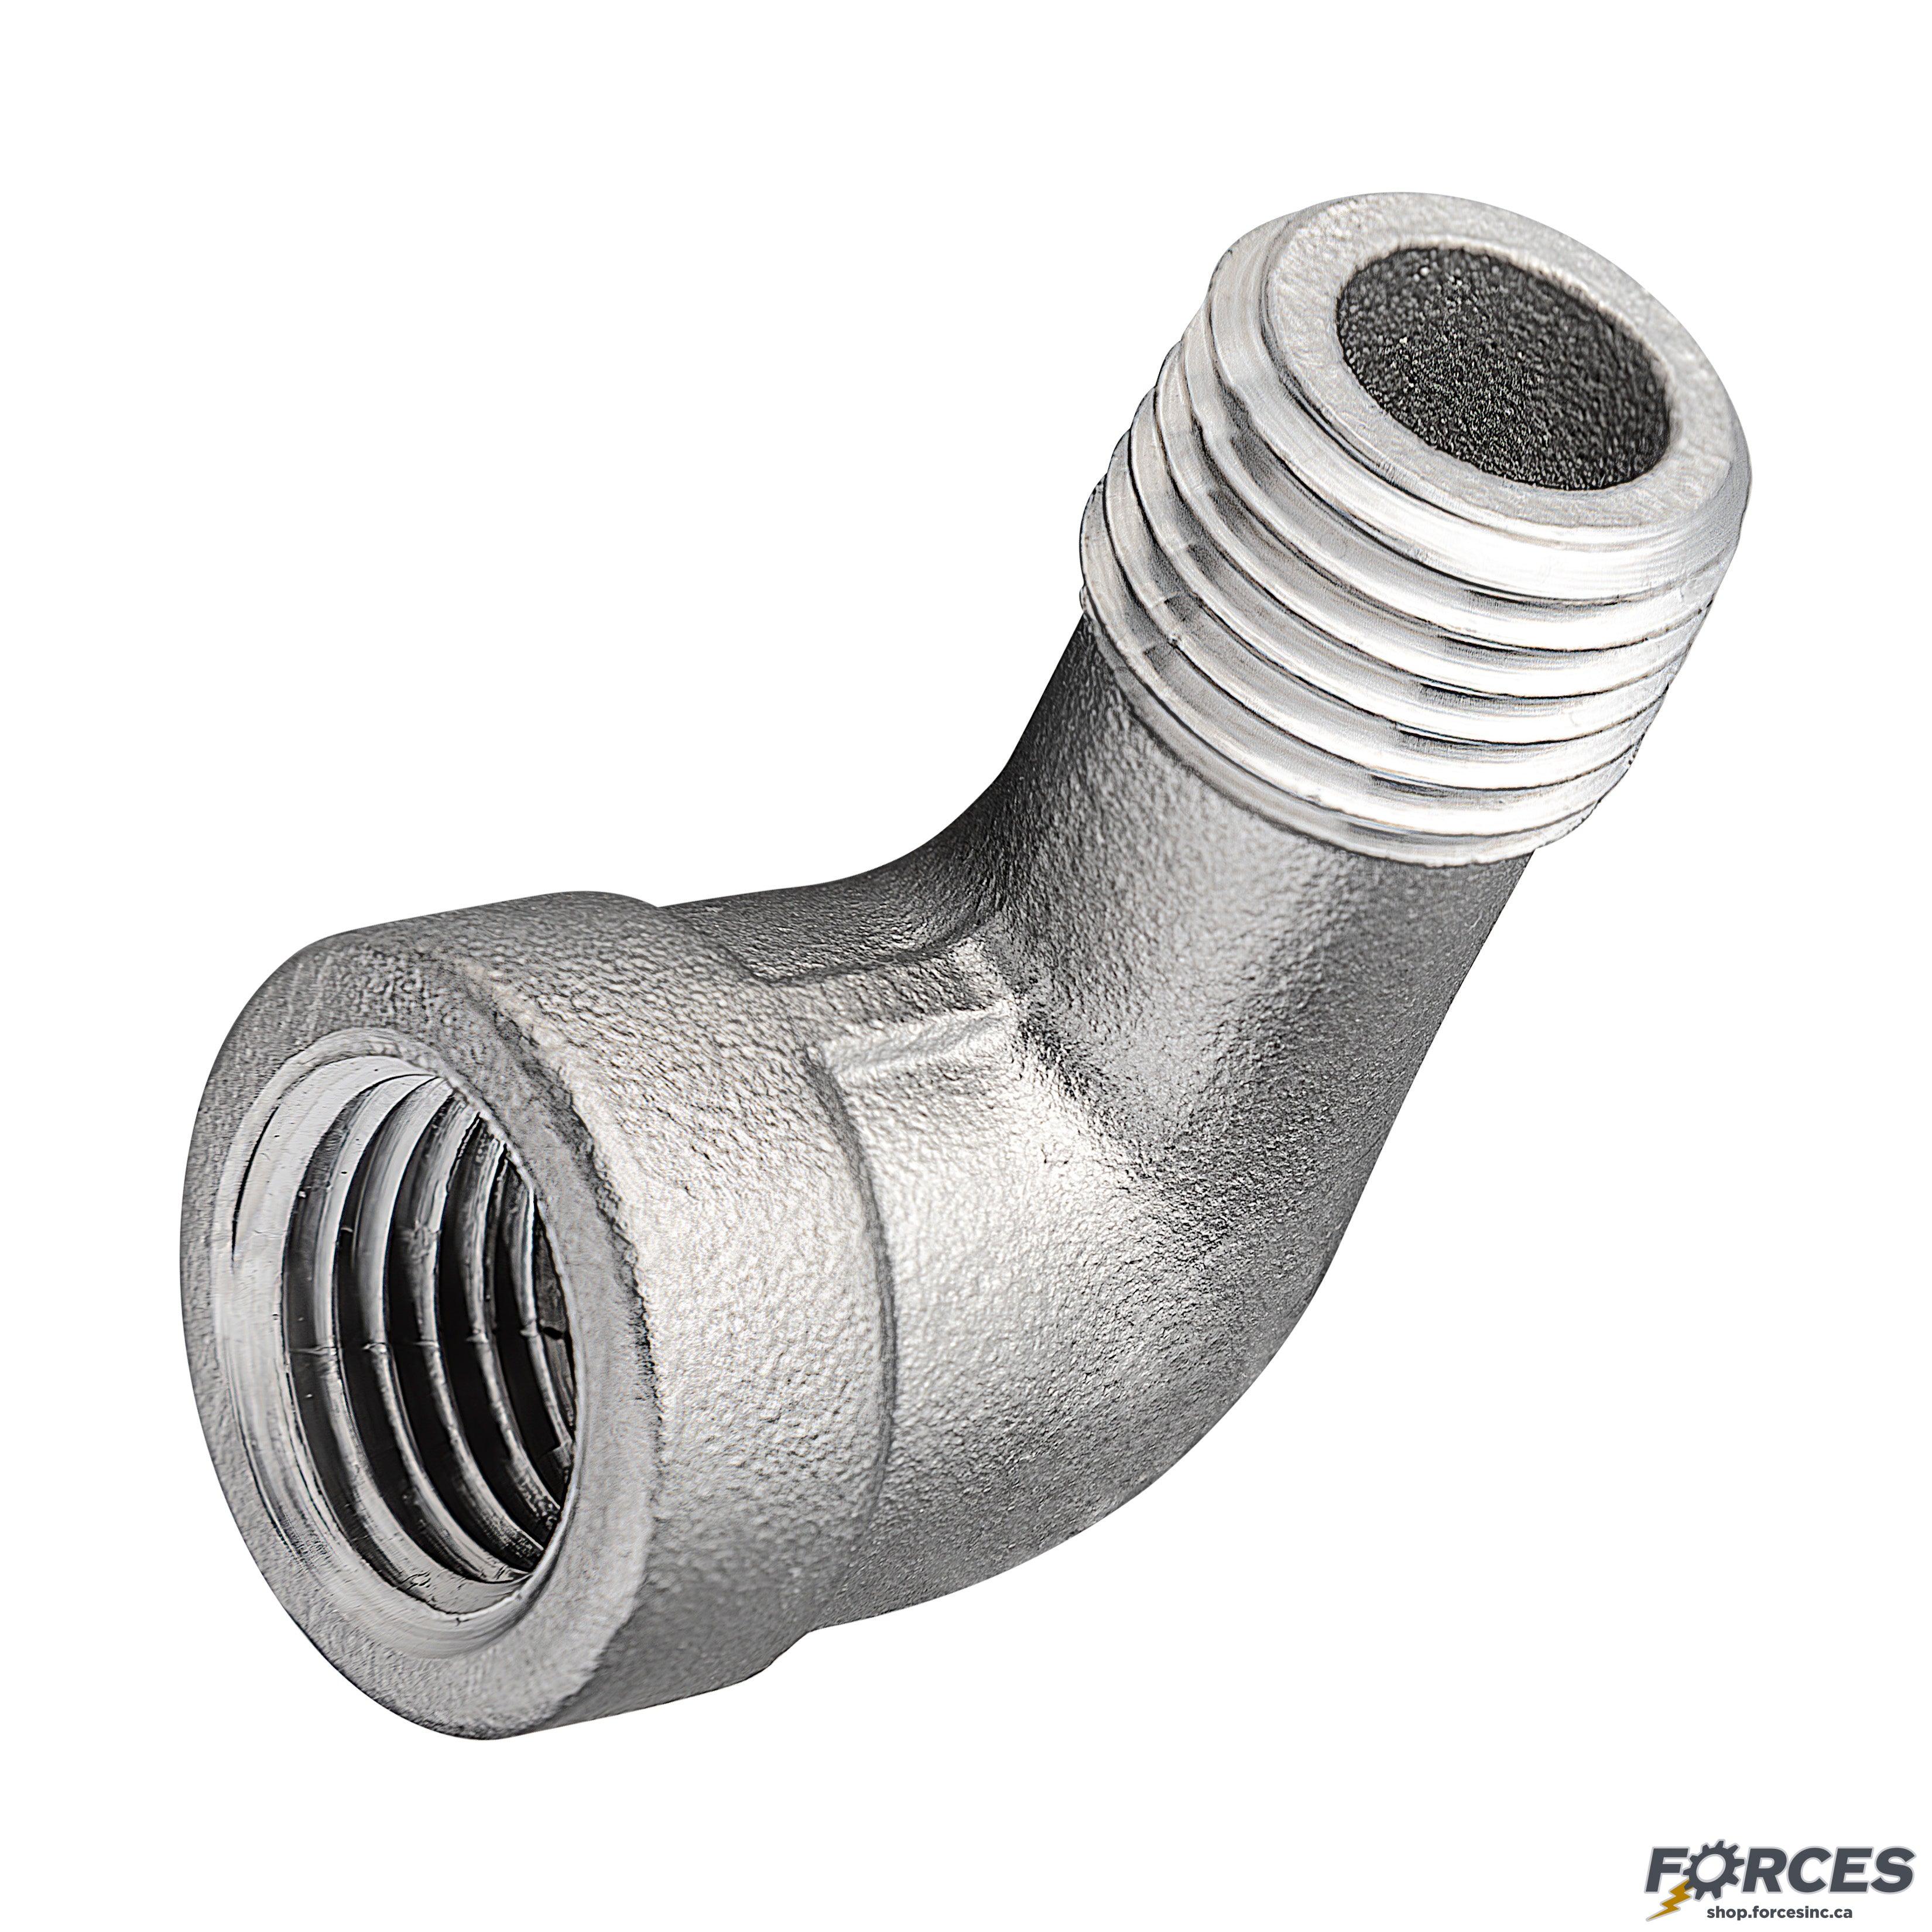 3/8" Street Elbow 90° NPT #150 - Stainless Steel 304 - Forces Inc